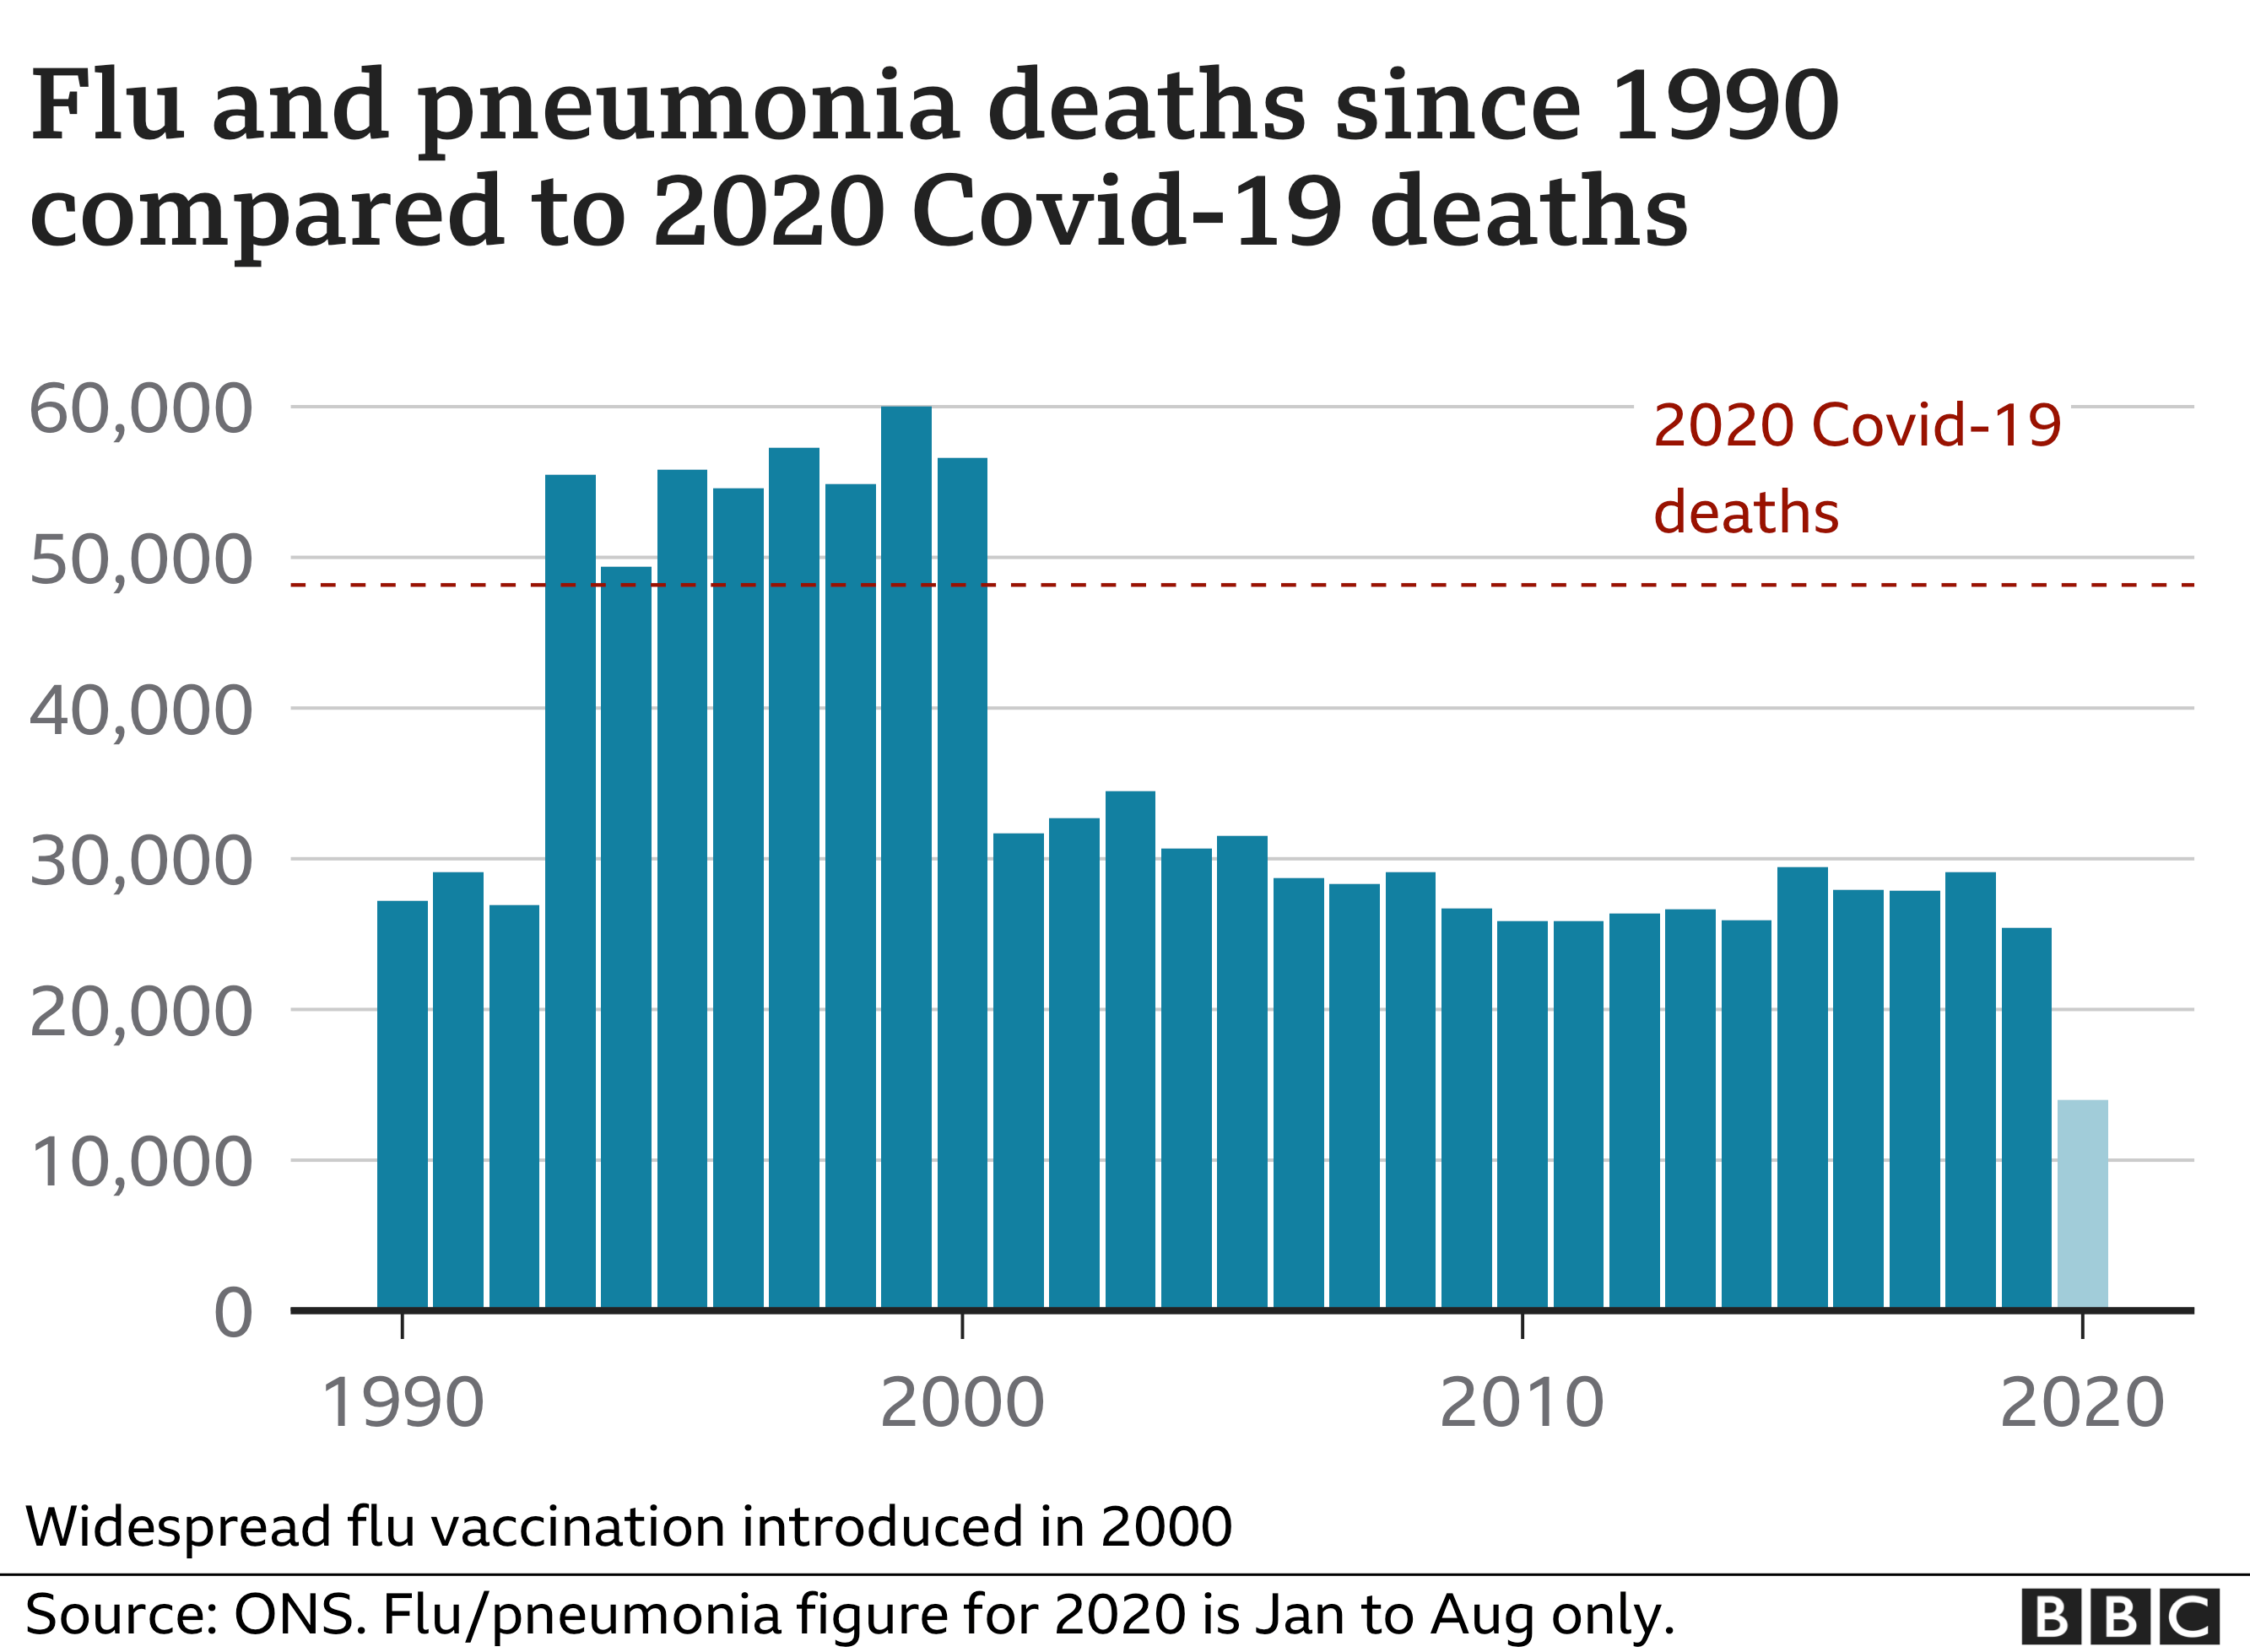 Chart showing flu/pneumonia deaths and Covid-19 deaths compared